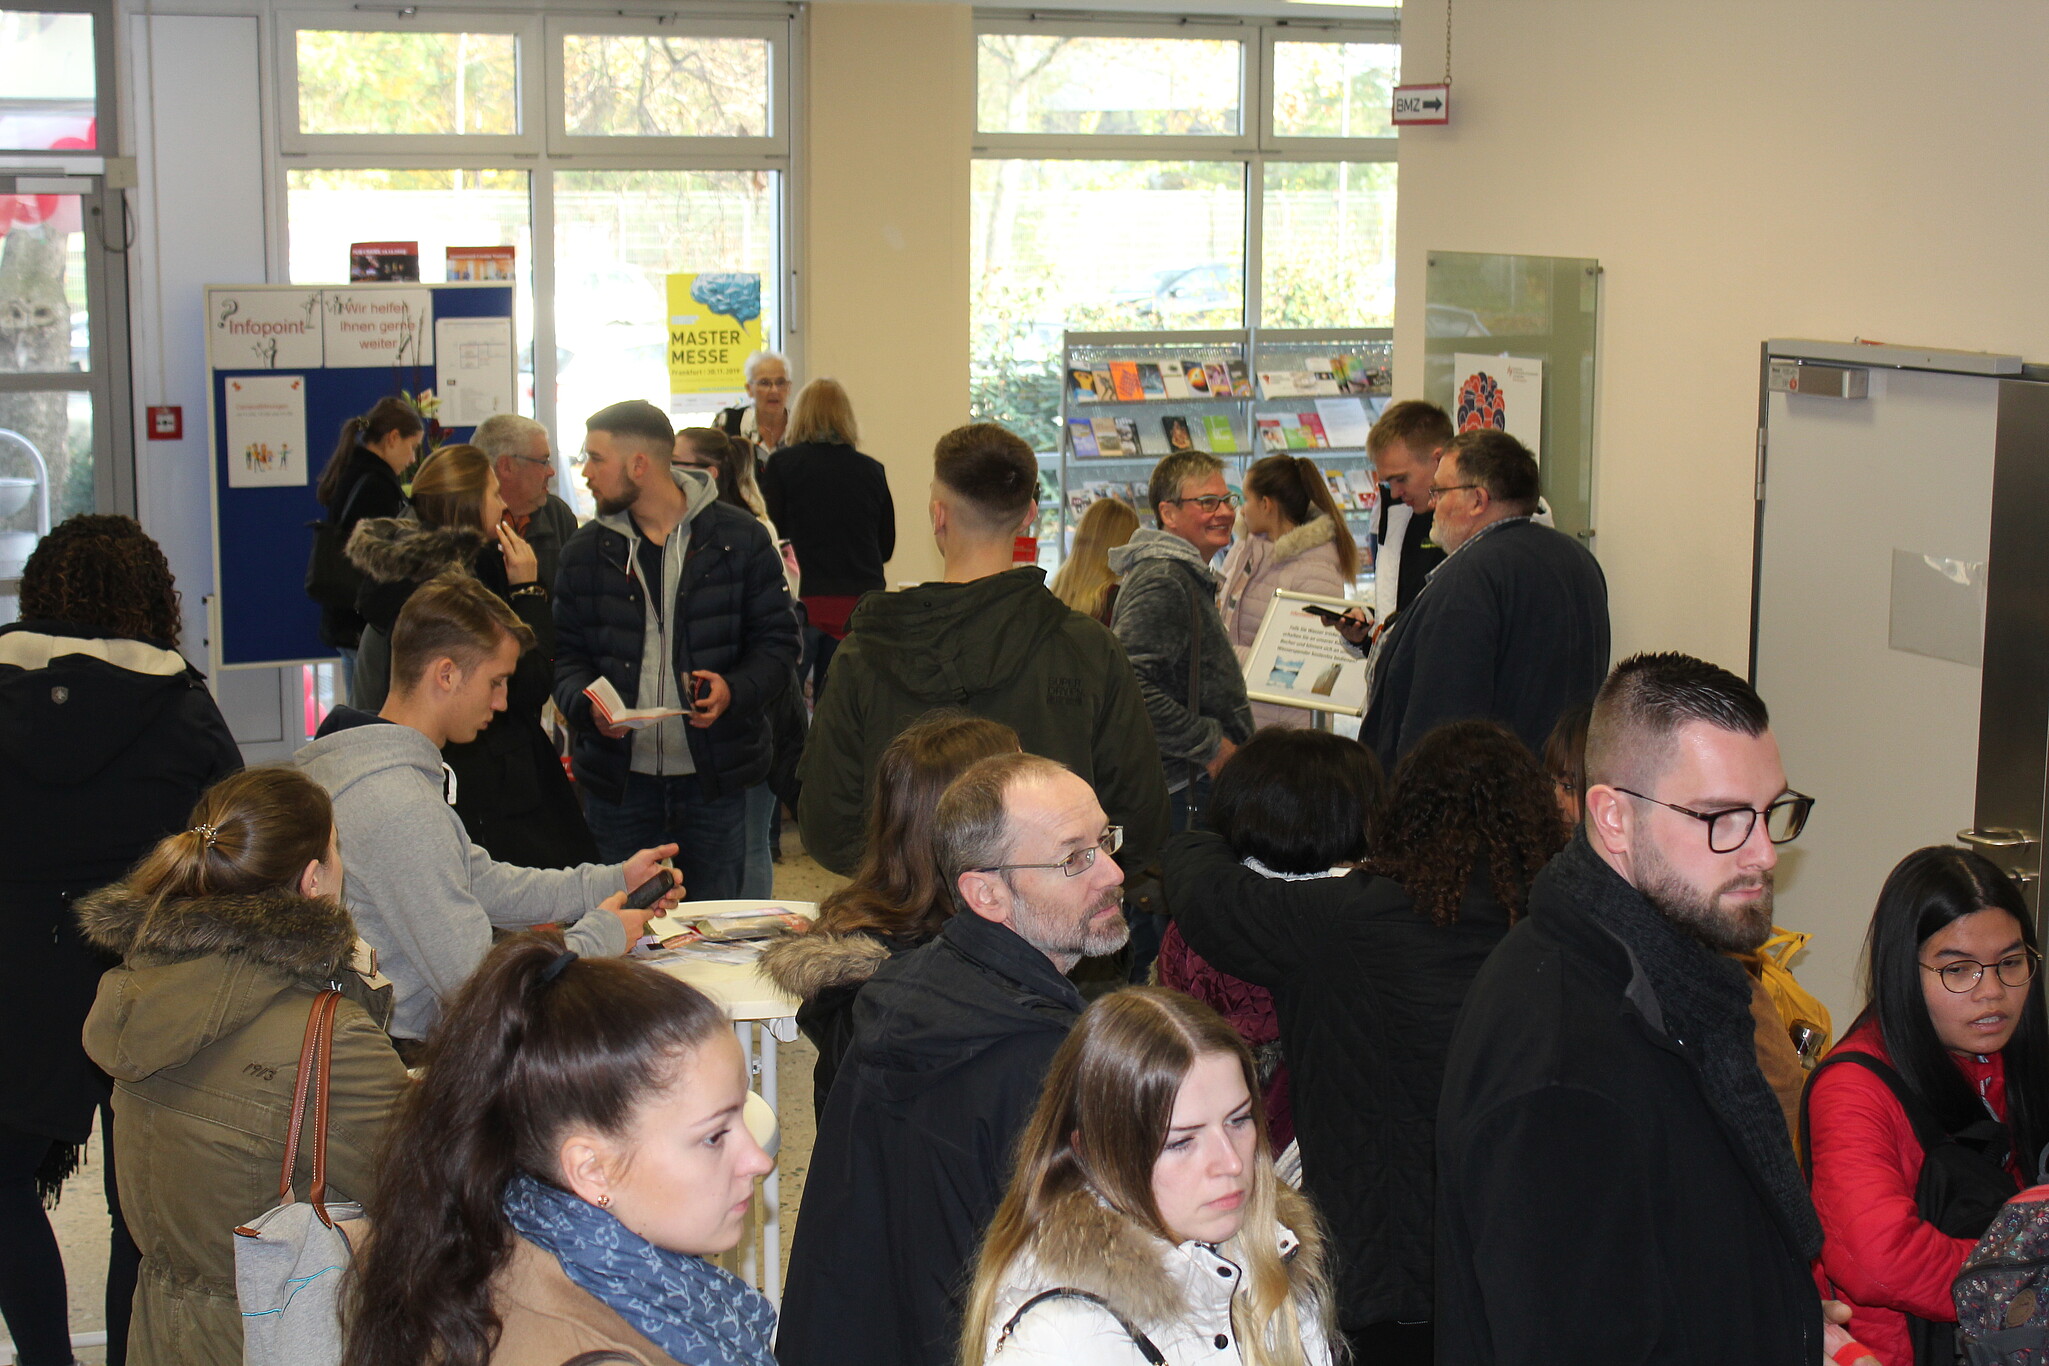 Full house at this year's open day at HWG LU